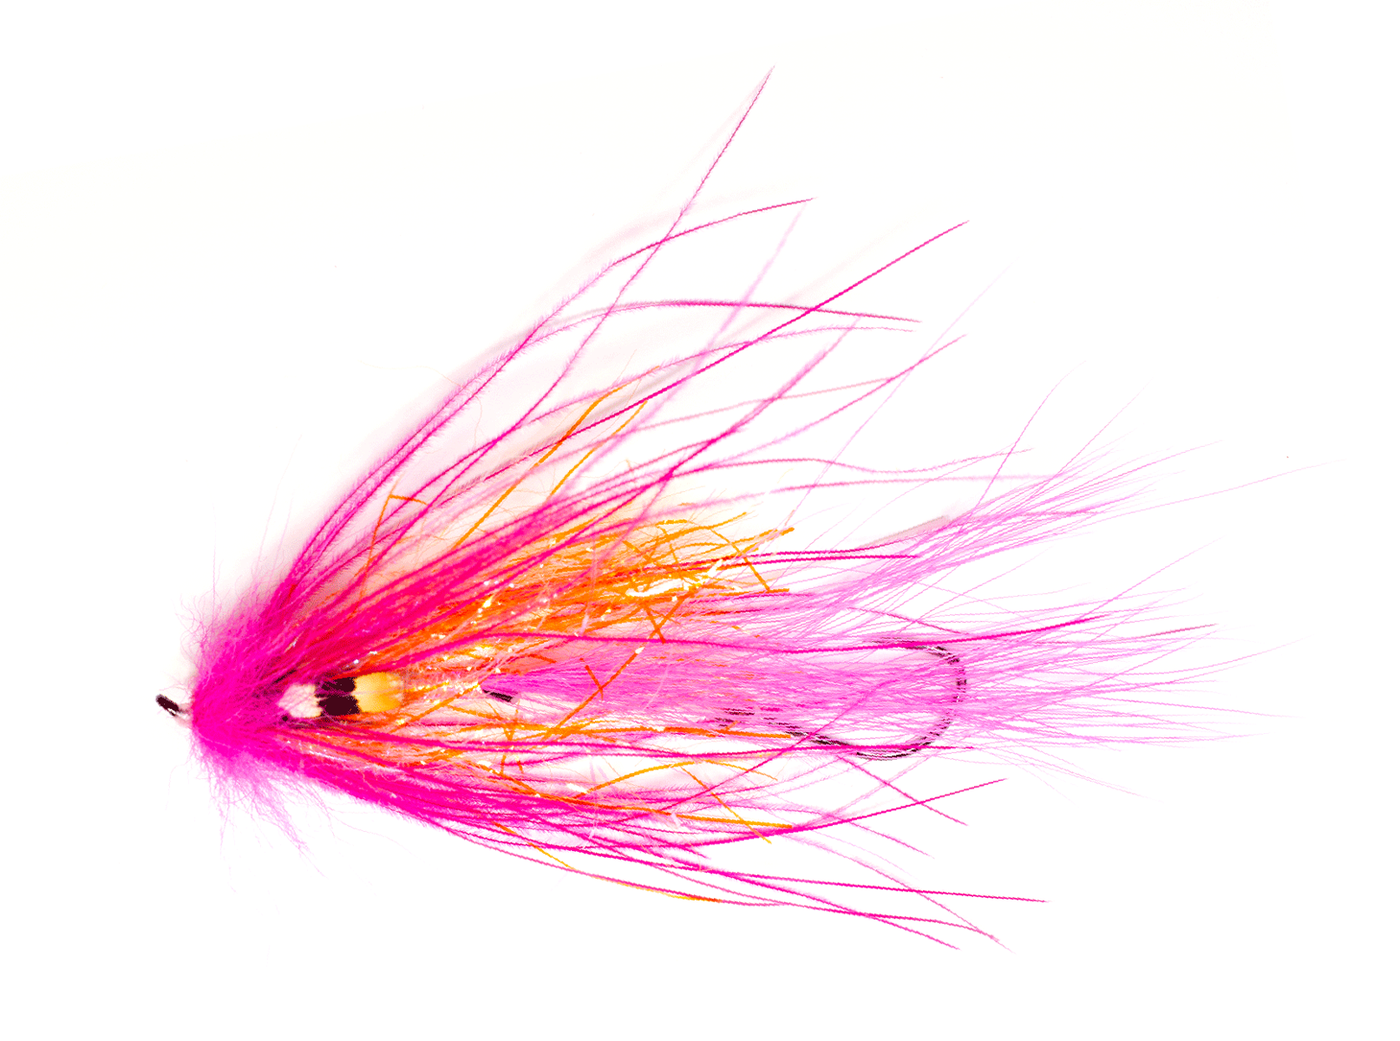 Fly-tied-with-Predator-I-Hot-Orange-5D-brush-and-Hot-Pink-Fly-Fur